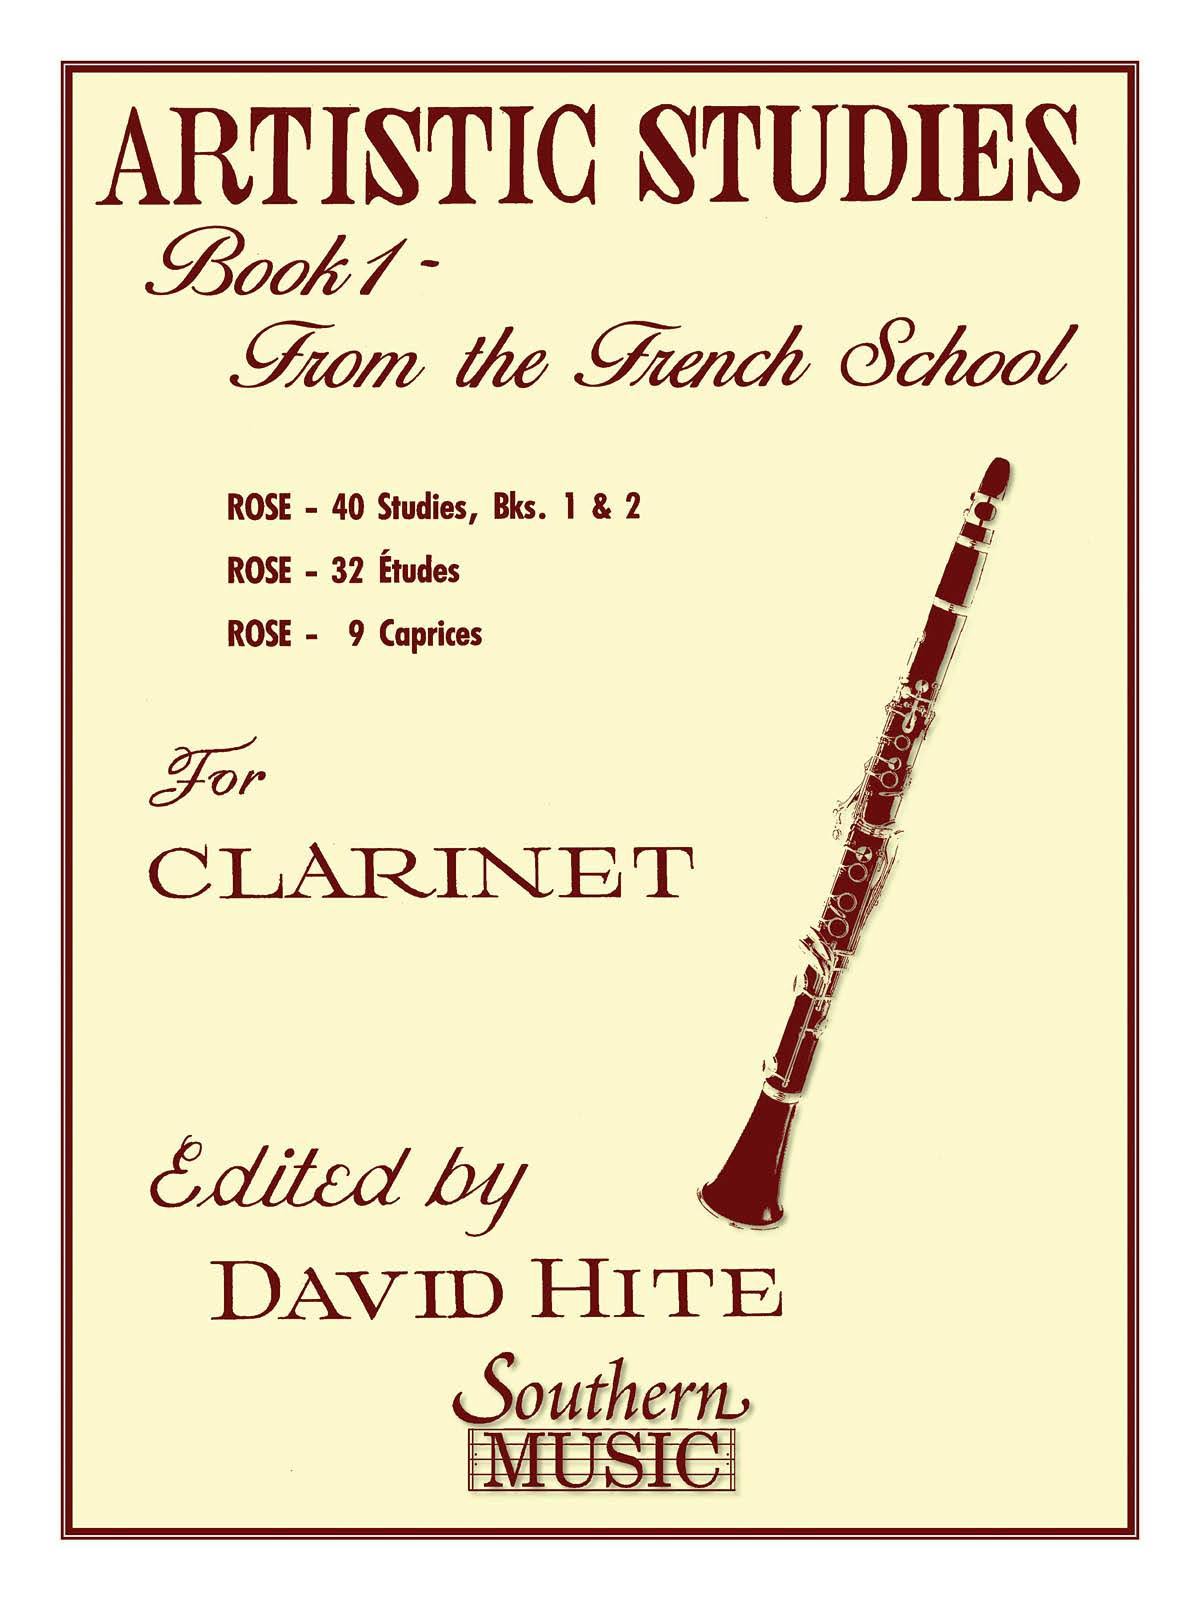 Artistic Studies for Clarinet, Book 1 : From the French School - David Hite (ed)